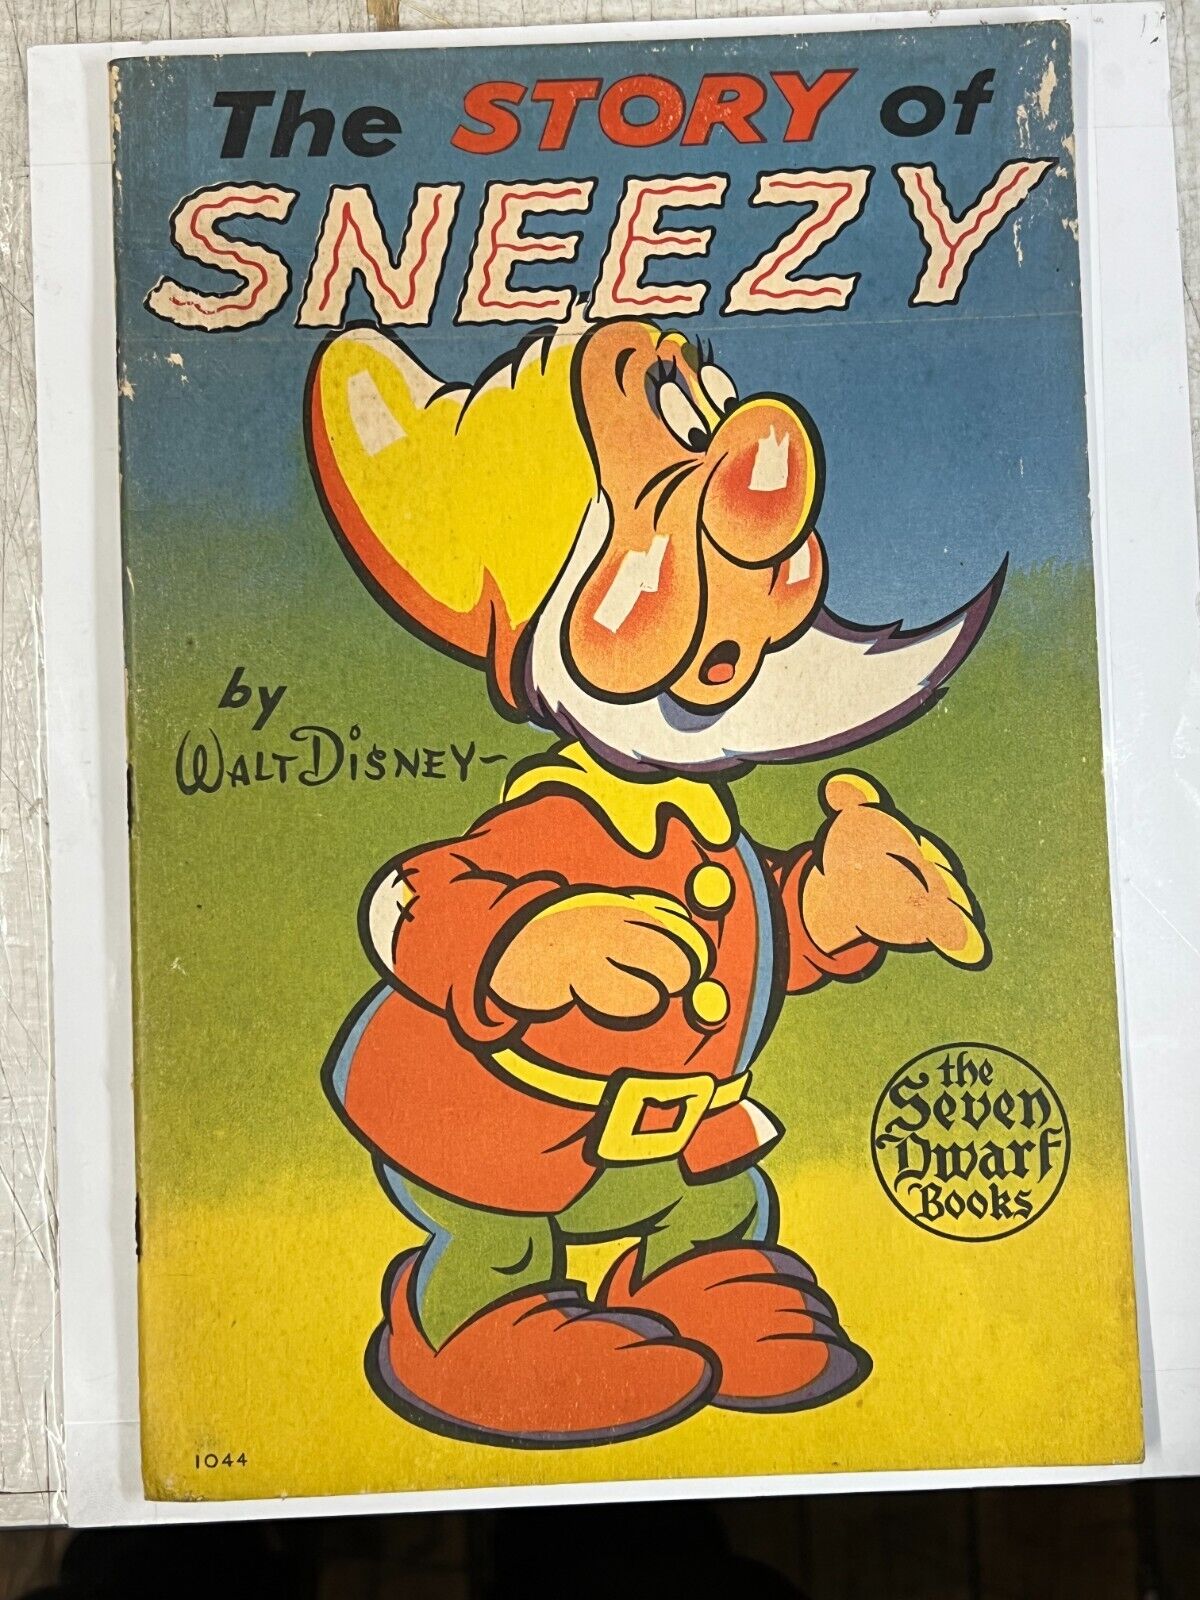 The Story Of Sneezy The Seven Dwarf Books Whitman Publishing 1938 | Combined Shi